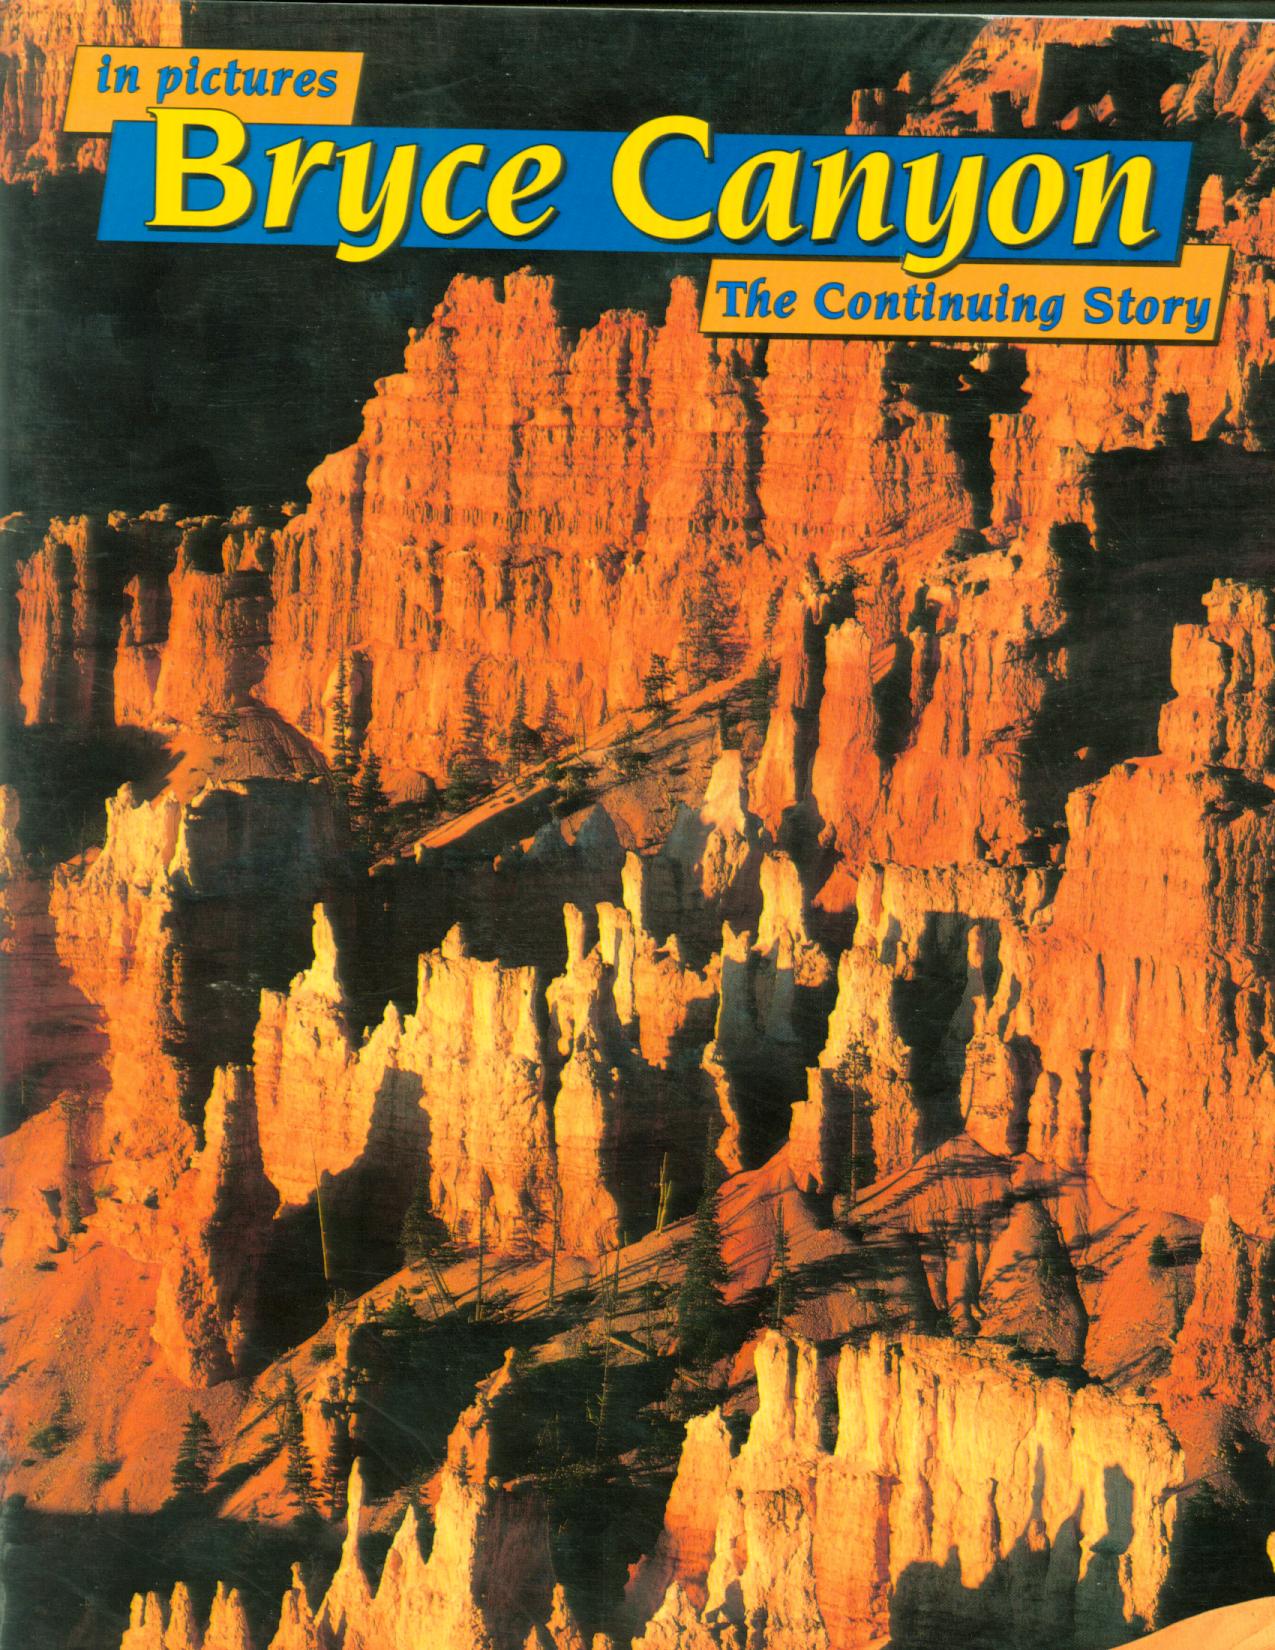 BRYCE CANYON IN PICTURES: the continuing story (UT).